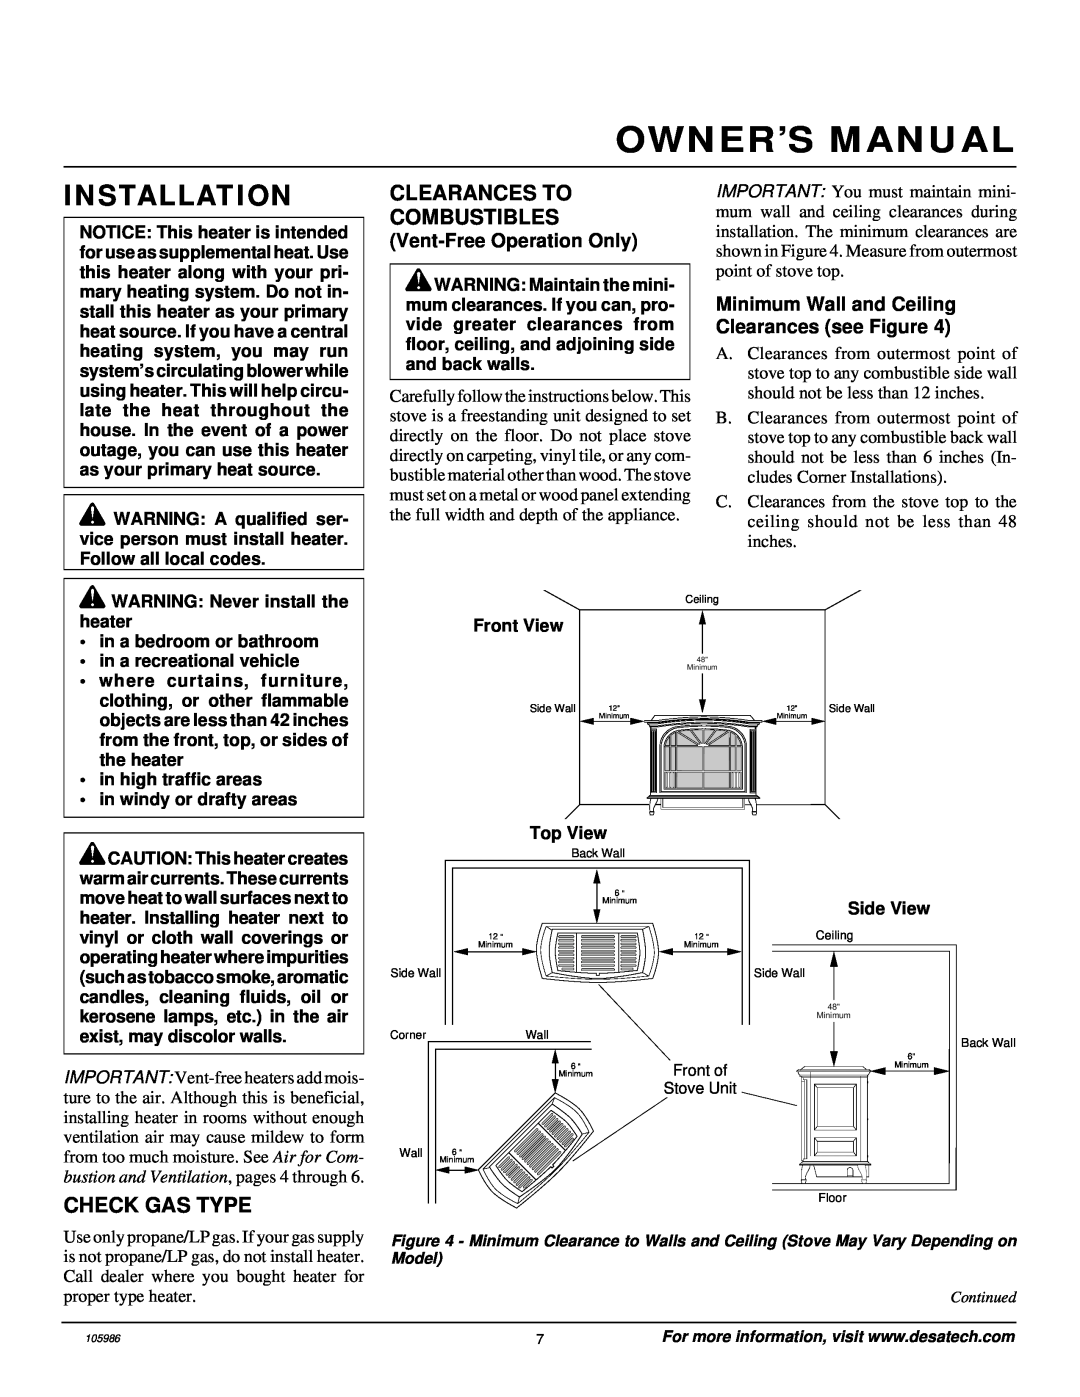 Desa MSVFBP installation manual Installation, Clearances To Combustibles, Check Gas Type, Vent-FreeOperation Only 